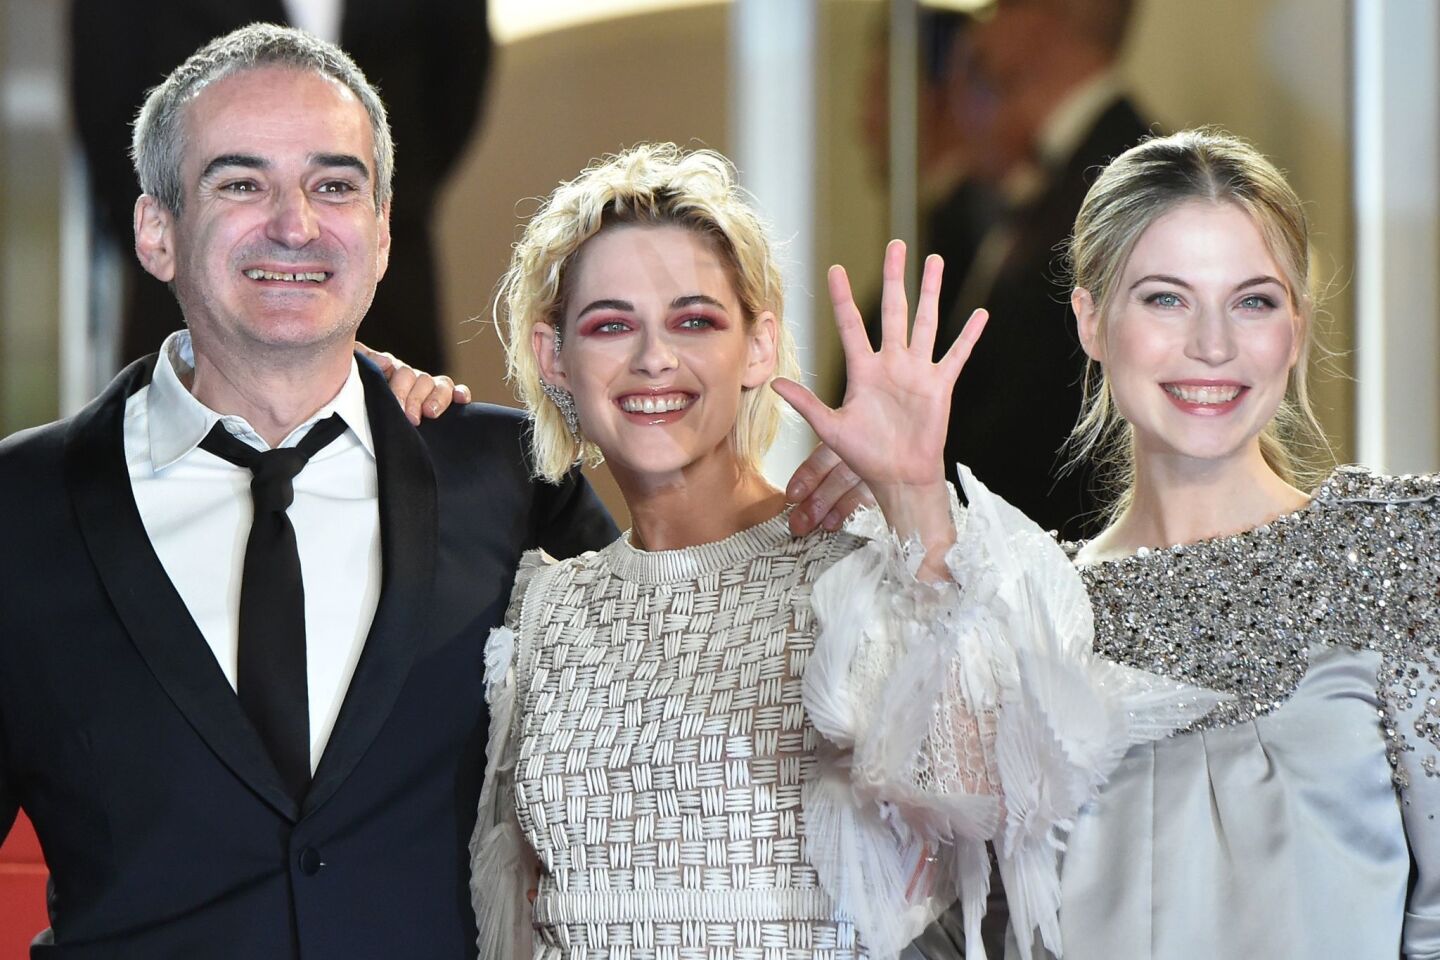 Director Olivier Assayas, actress Kristen Stewart and actress Nora von Waldstatten attend the Cannes Film Festival screening of the film "Personal Shopper" on May 17.